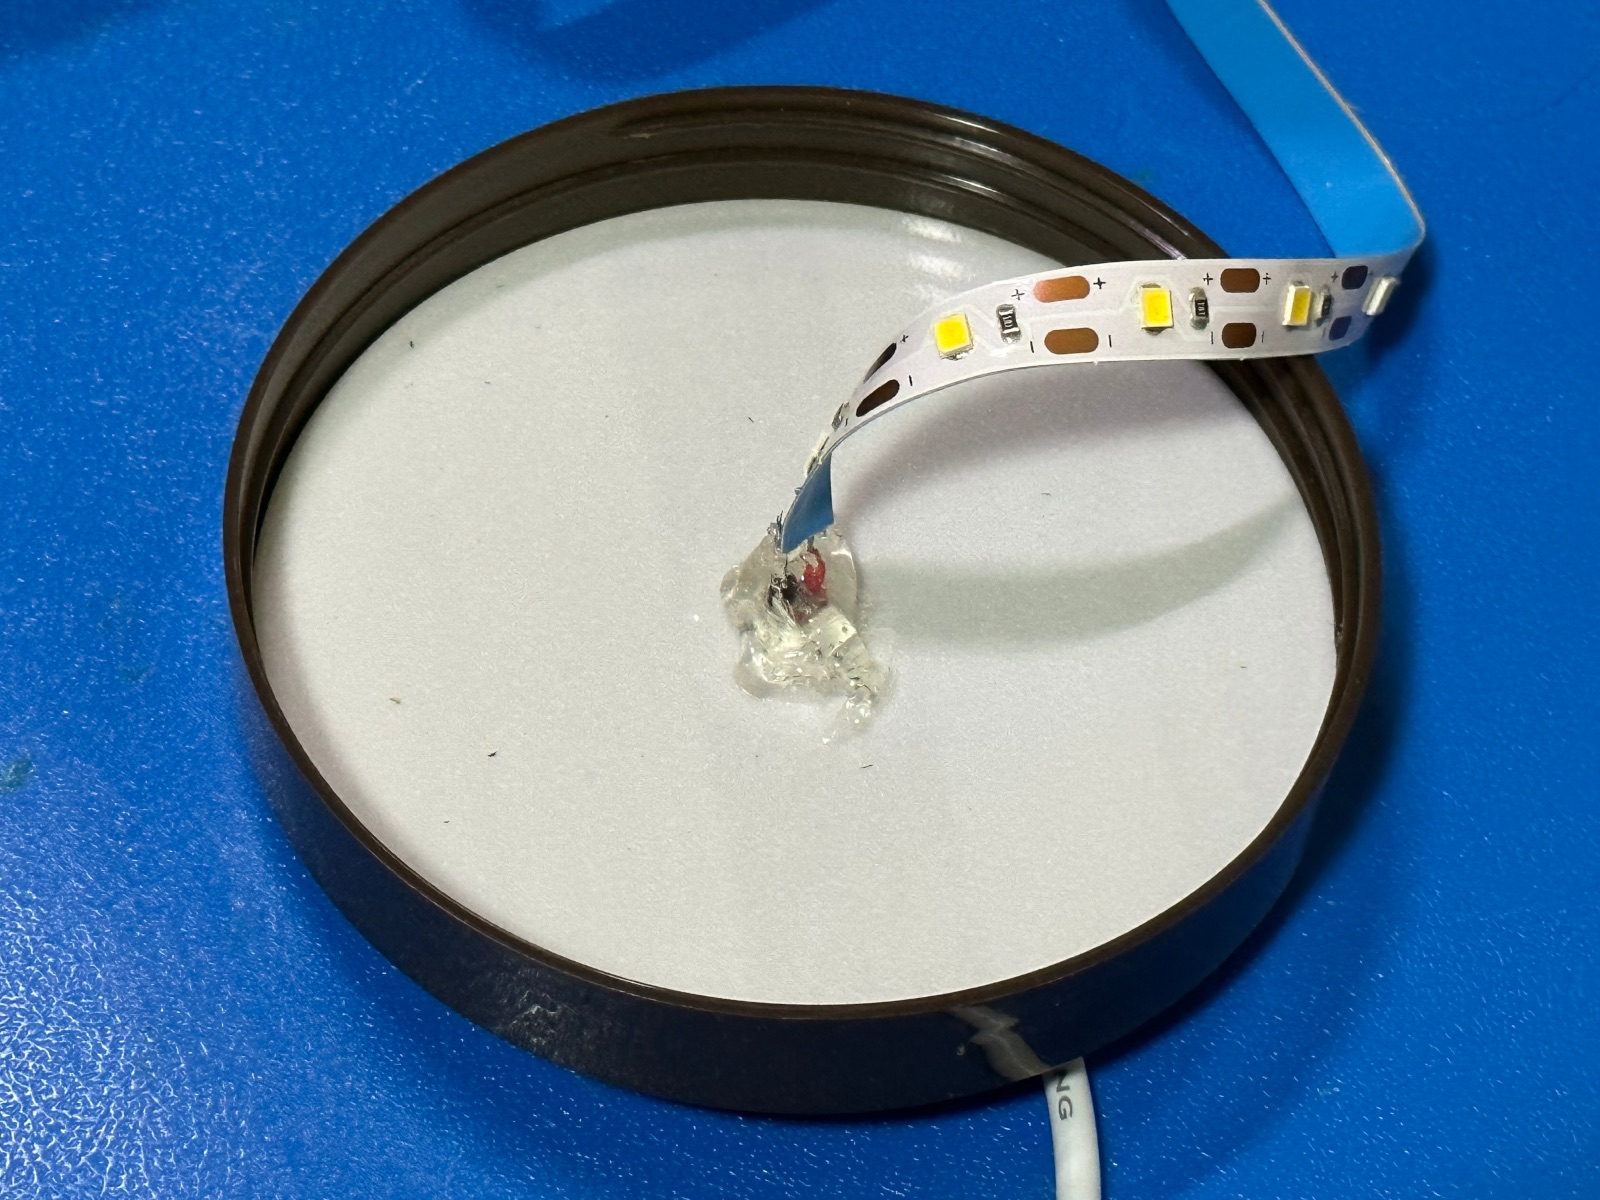 5V Warm white LED light strip soldered onto 2 cable wire and attached to the Carrot Carotene Calming Water Pad container lid